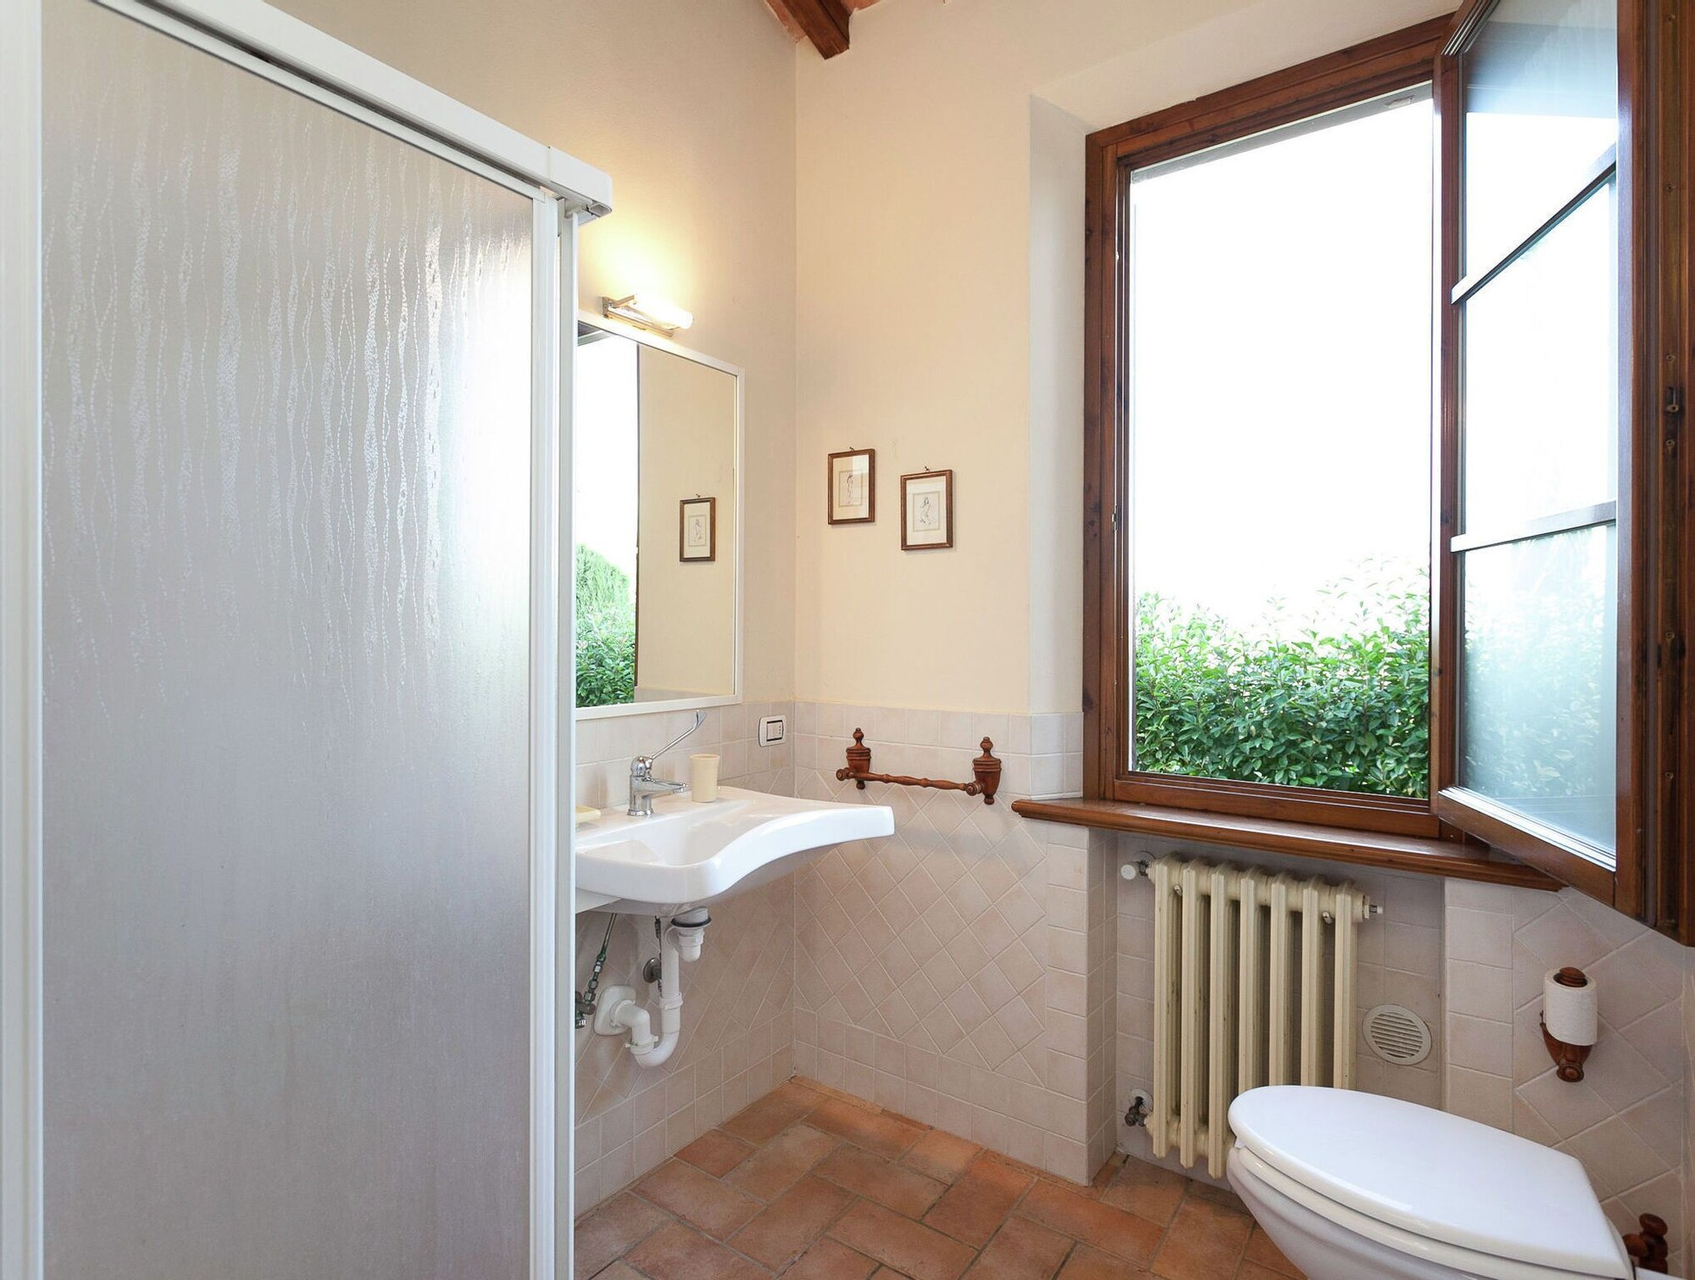 Bathroom 1, Cozy Home in Cerreto Guidi With Boules Court, Florence